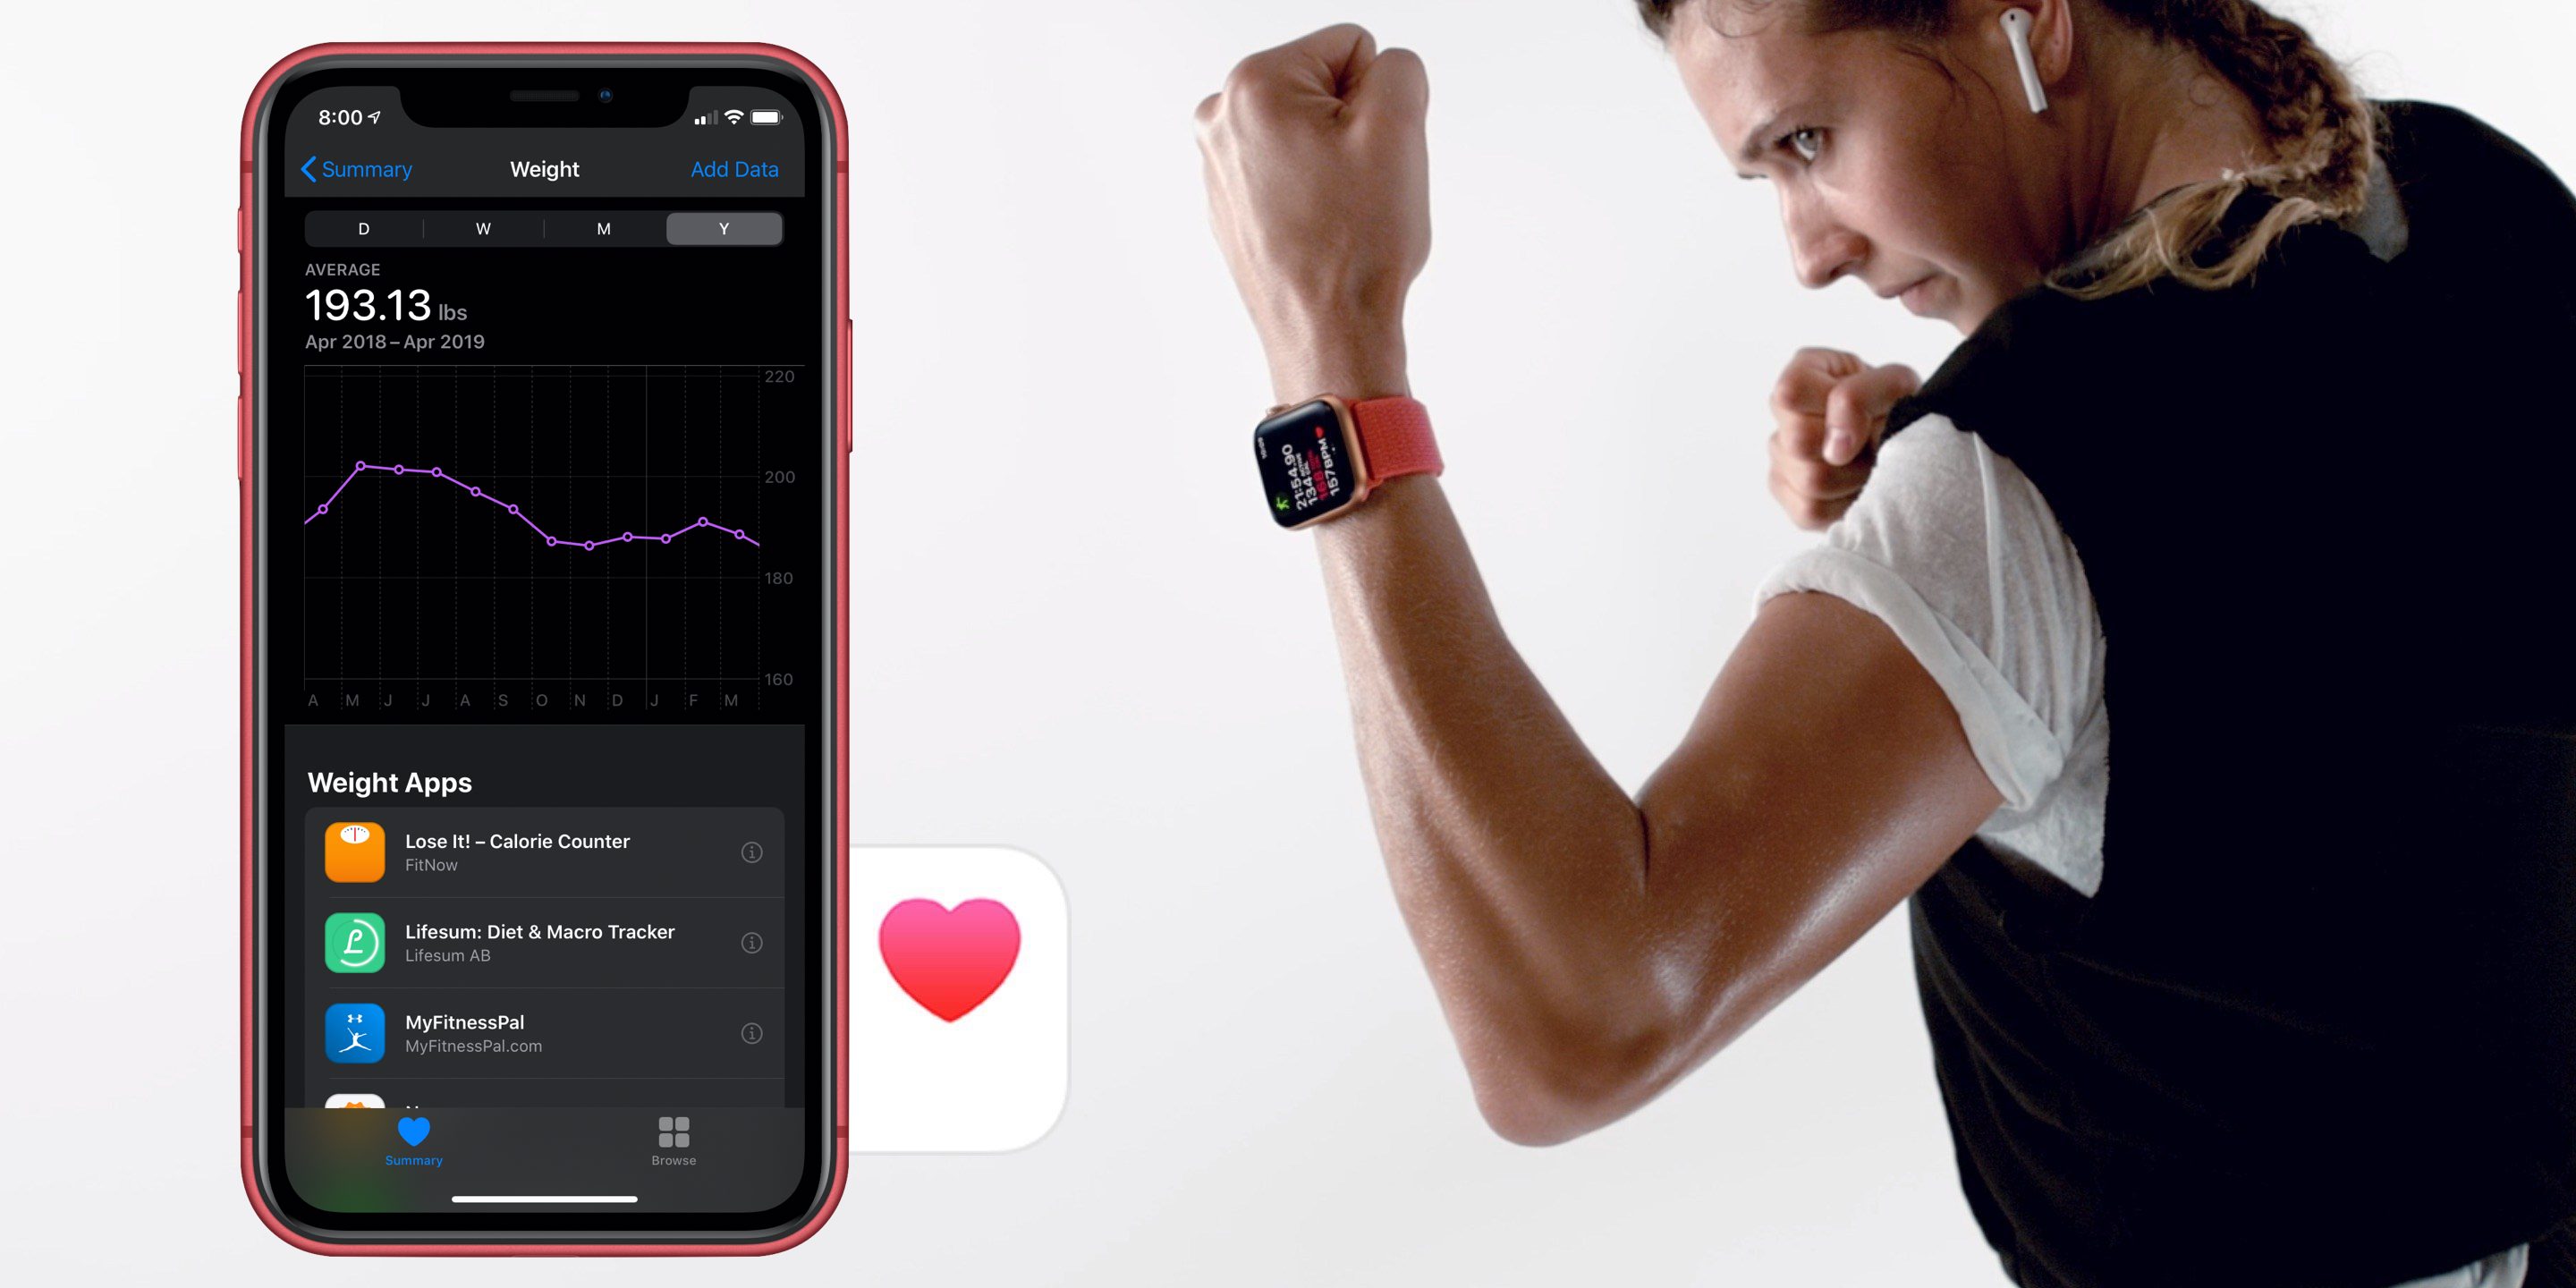 [Update: March 2021] Working out with Apple Watch? These smart scales sync weight with iPhone